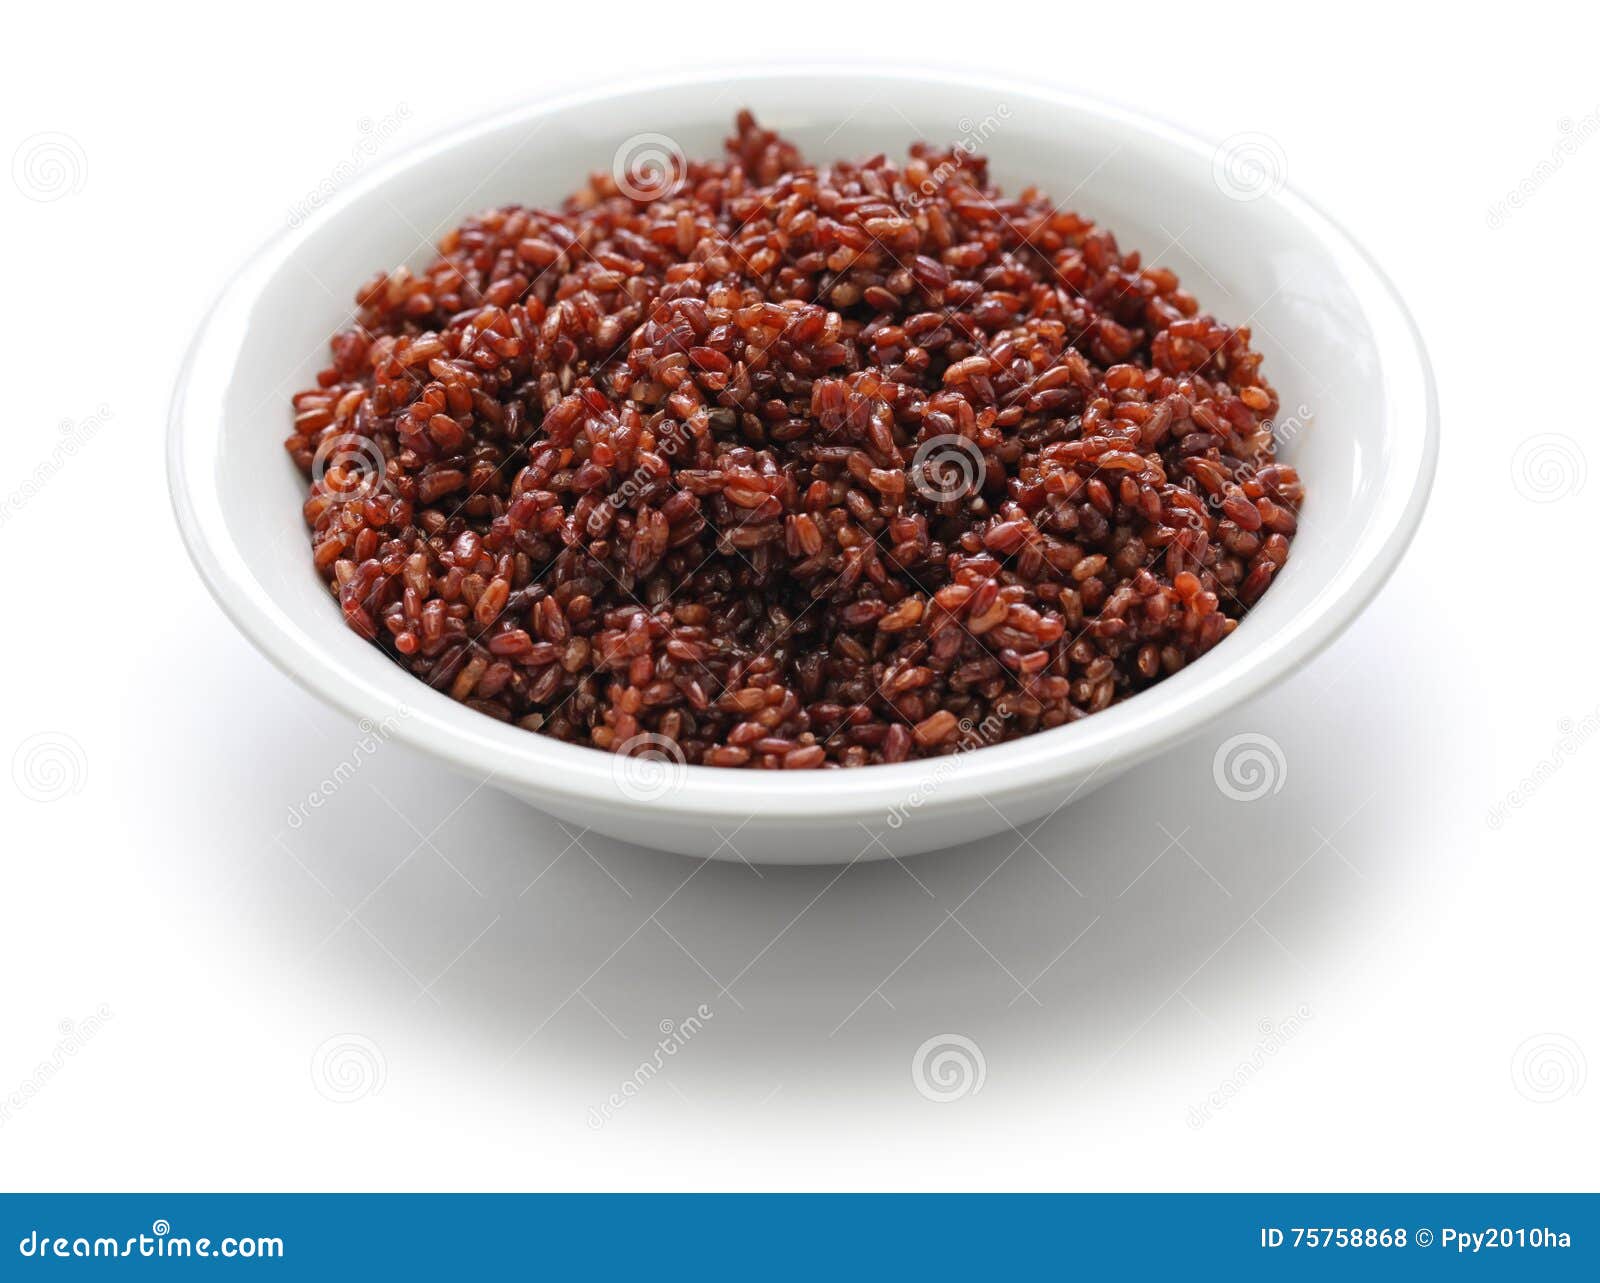 cooked bhutanese red rice